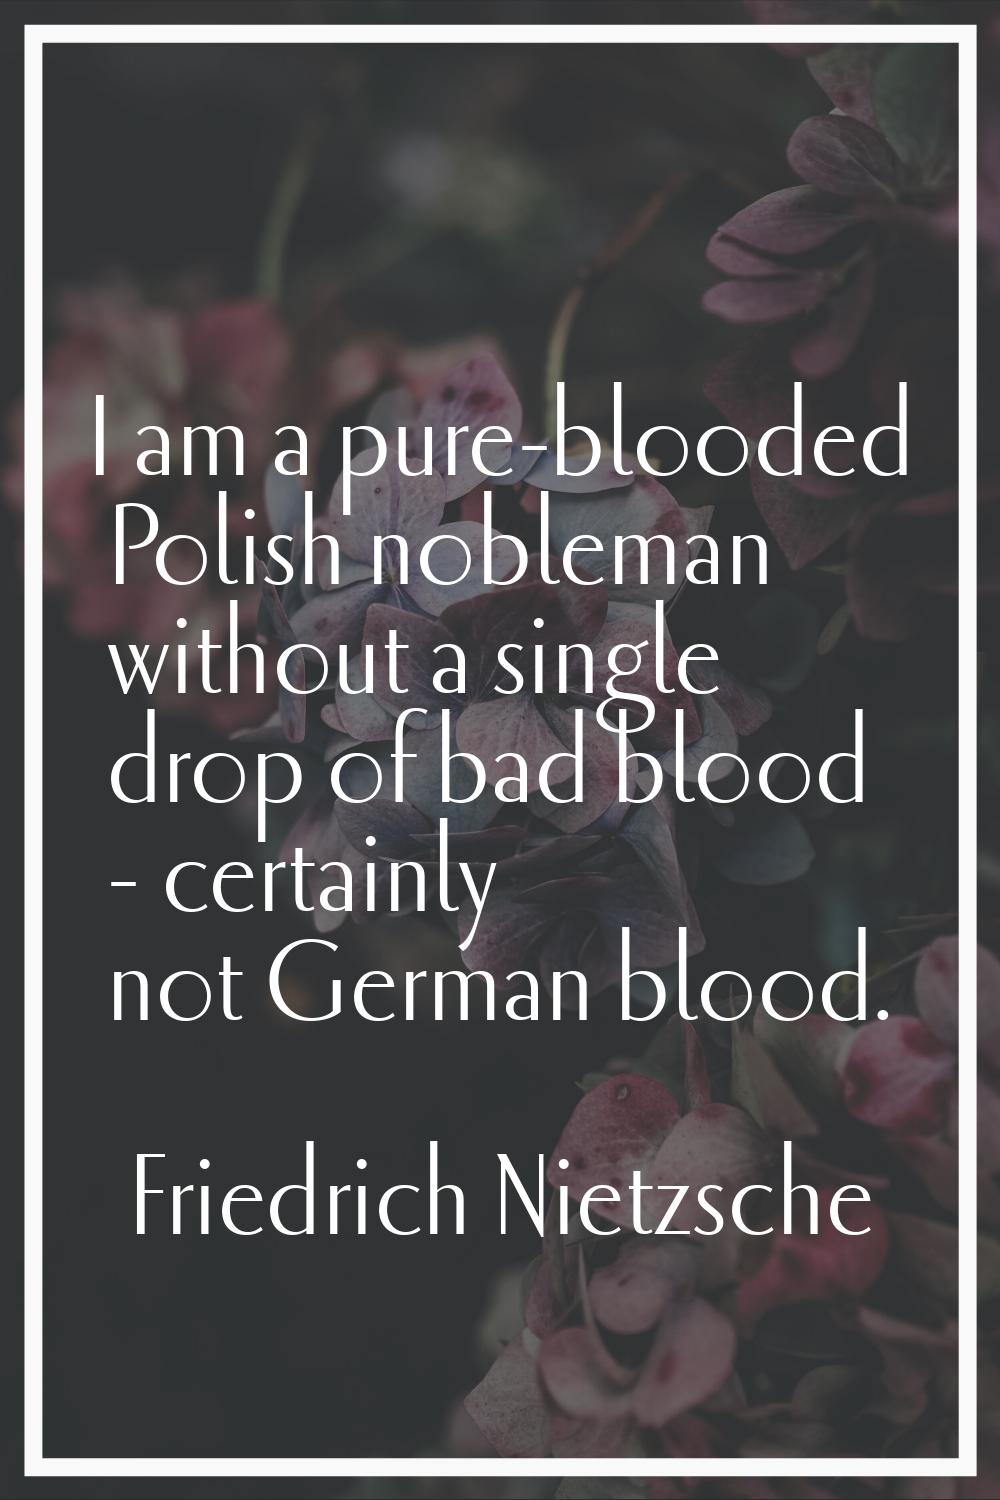 I am a pure-blooded Polish nobleman without a single drop of bad blood - certainly not German blood